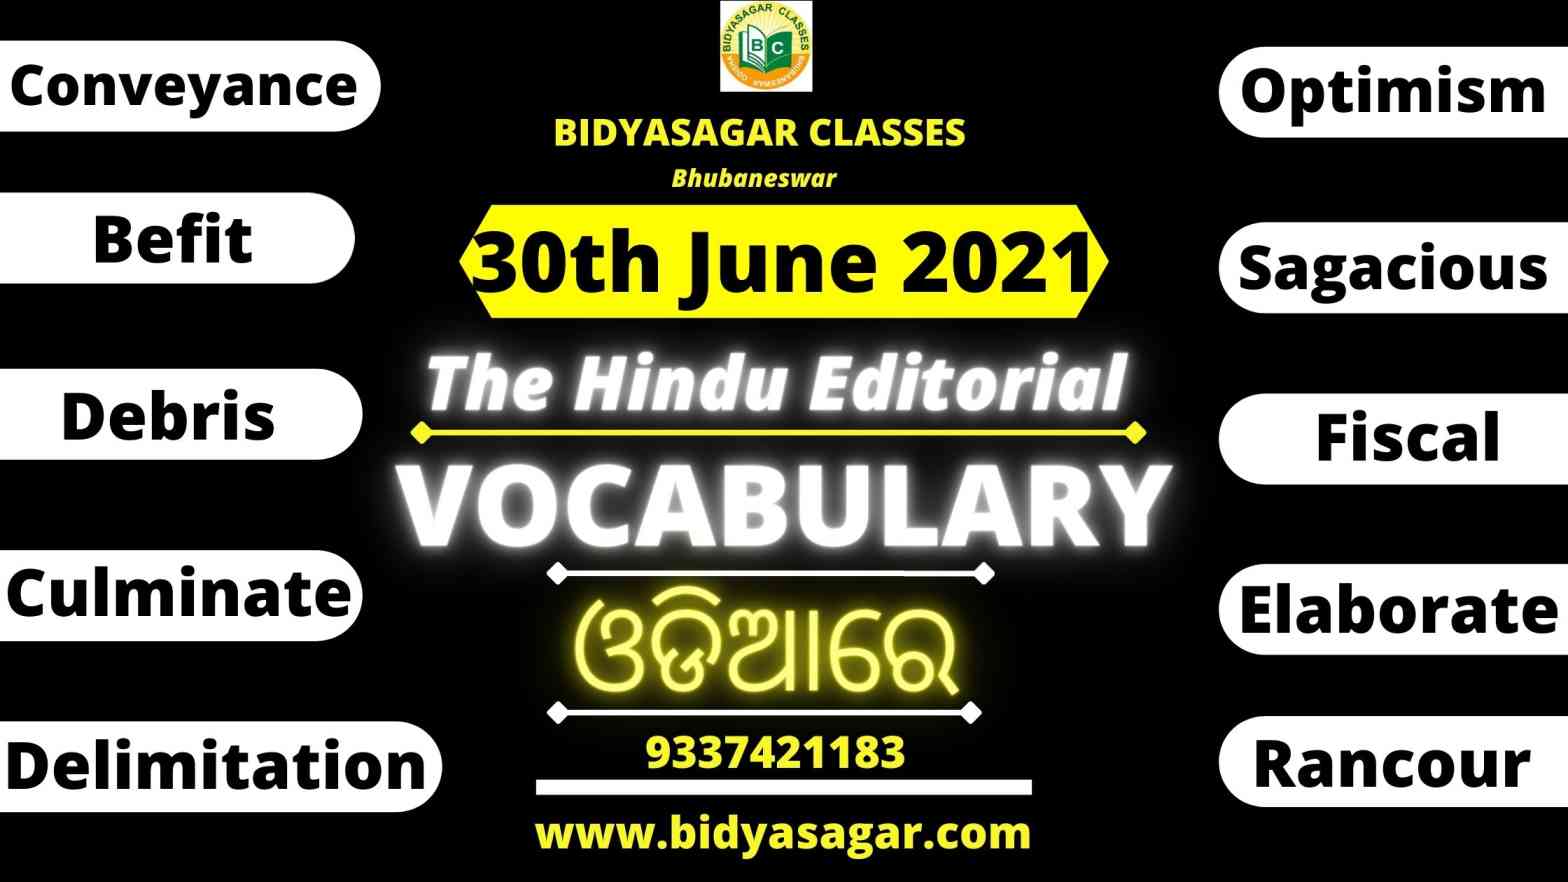 The Hindu Editorial Vocabulary of 30th June 2021